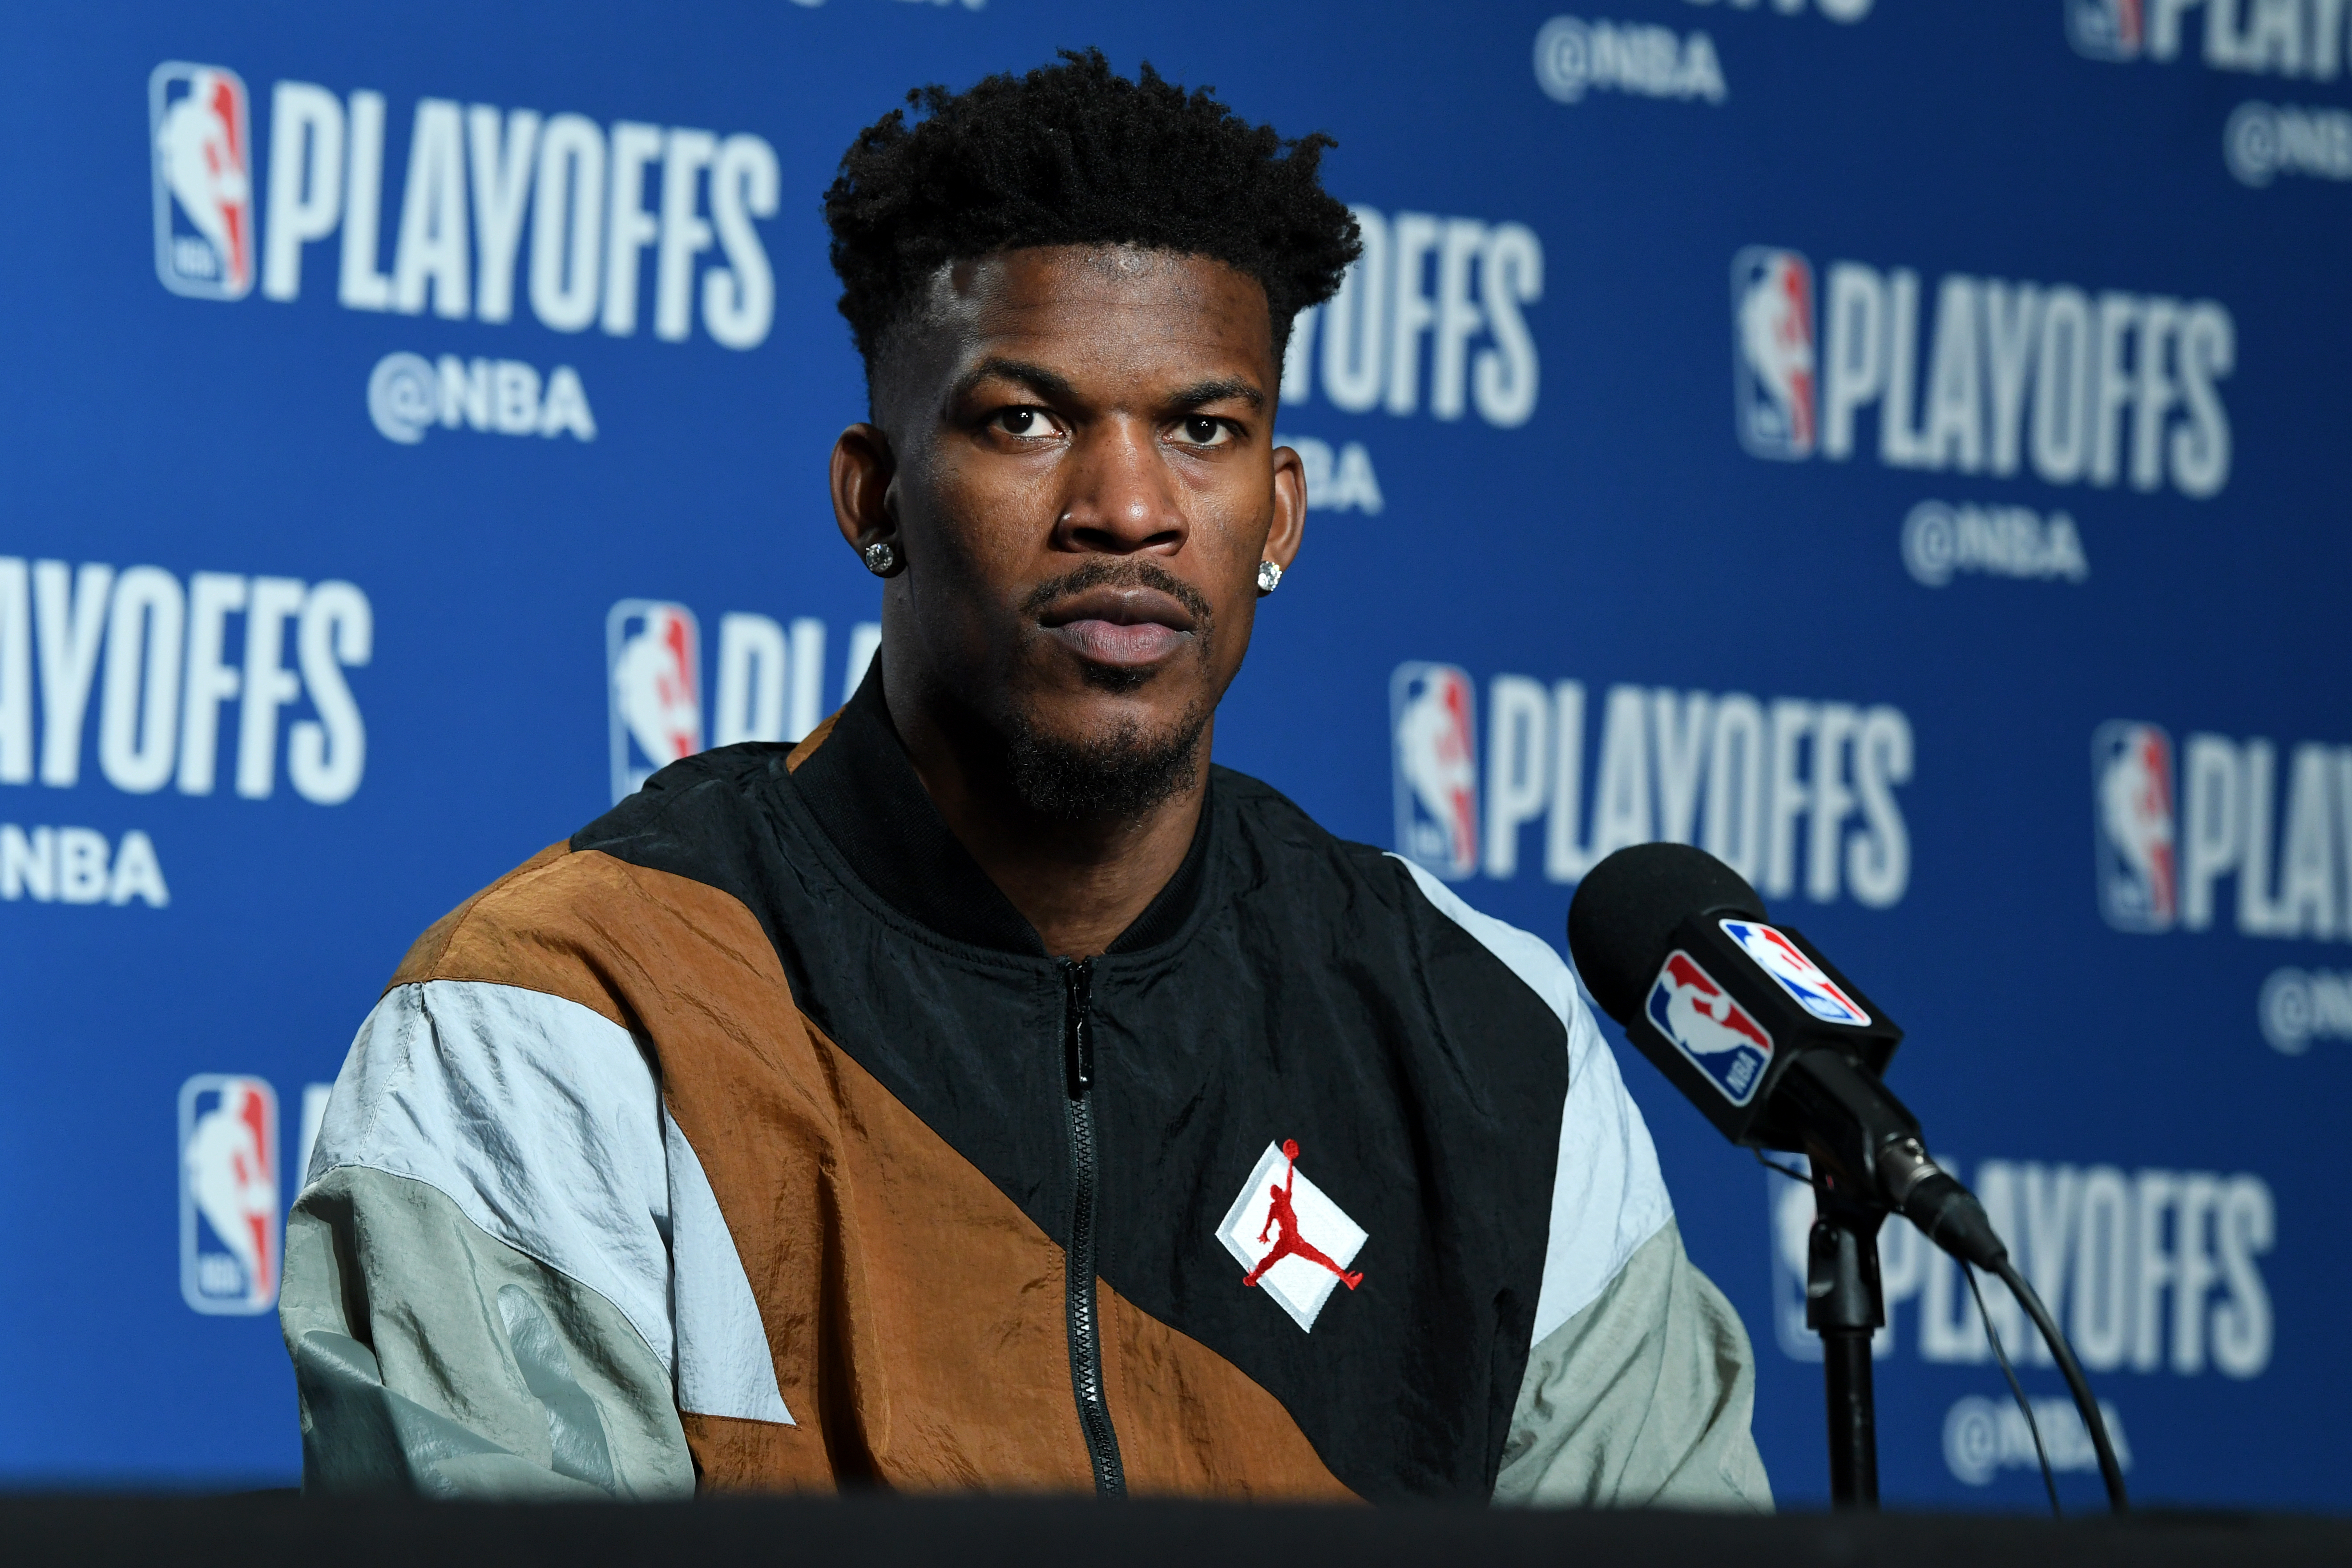 Jimmy Butler speaks with the media after game seven of the Eastern Conference Semi-Finals of the 2019 NBA Playoffs against the Toronto Raptors on May 12, 2019, in Ontario, Canada. | Source: Getty Images